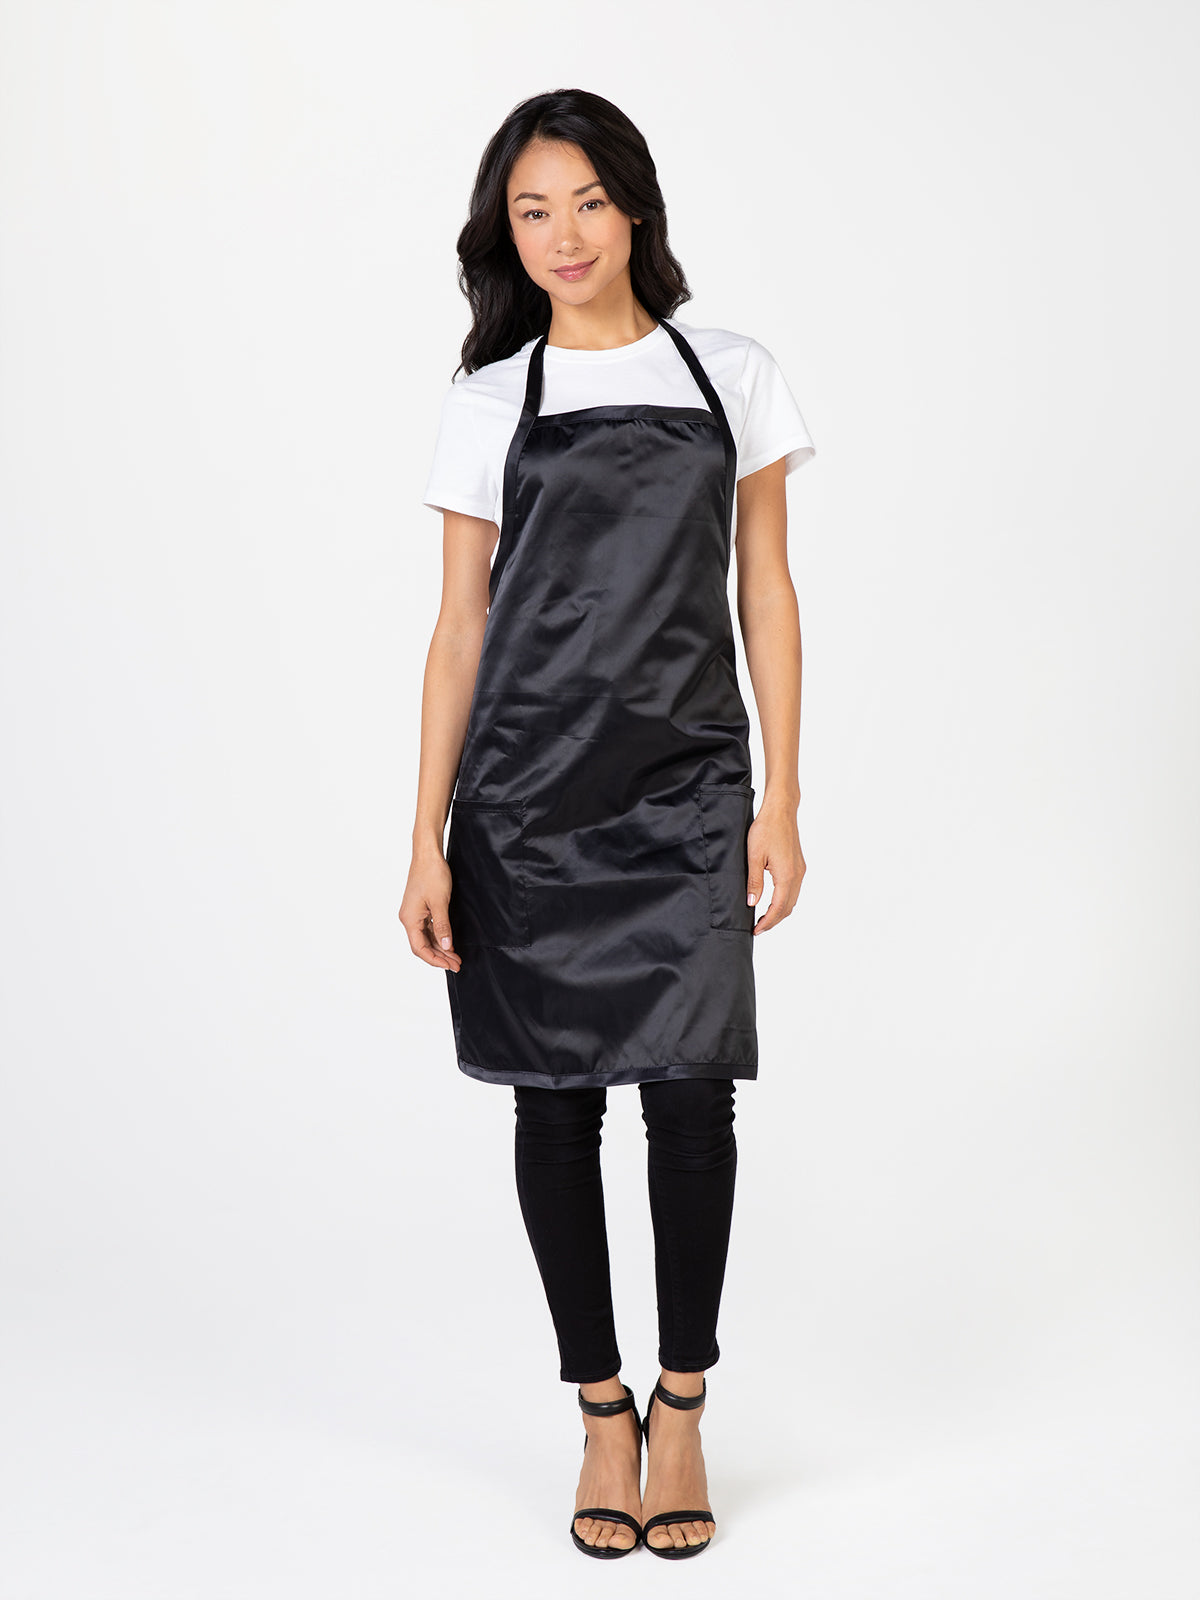 Black Satin Apron for Stylists and Cosmetology Professionals